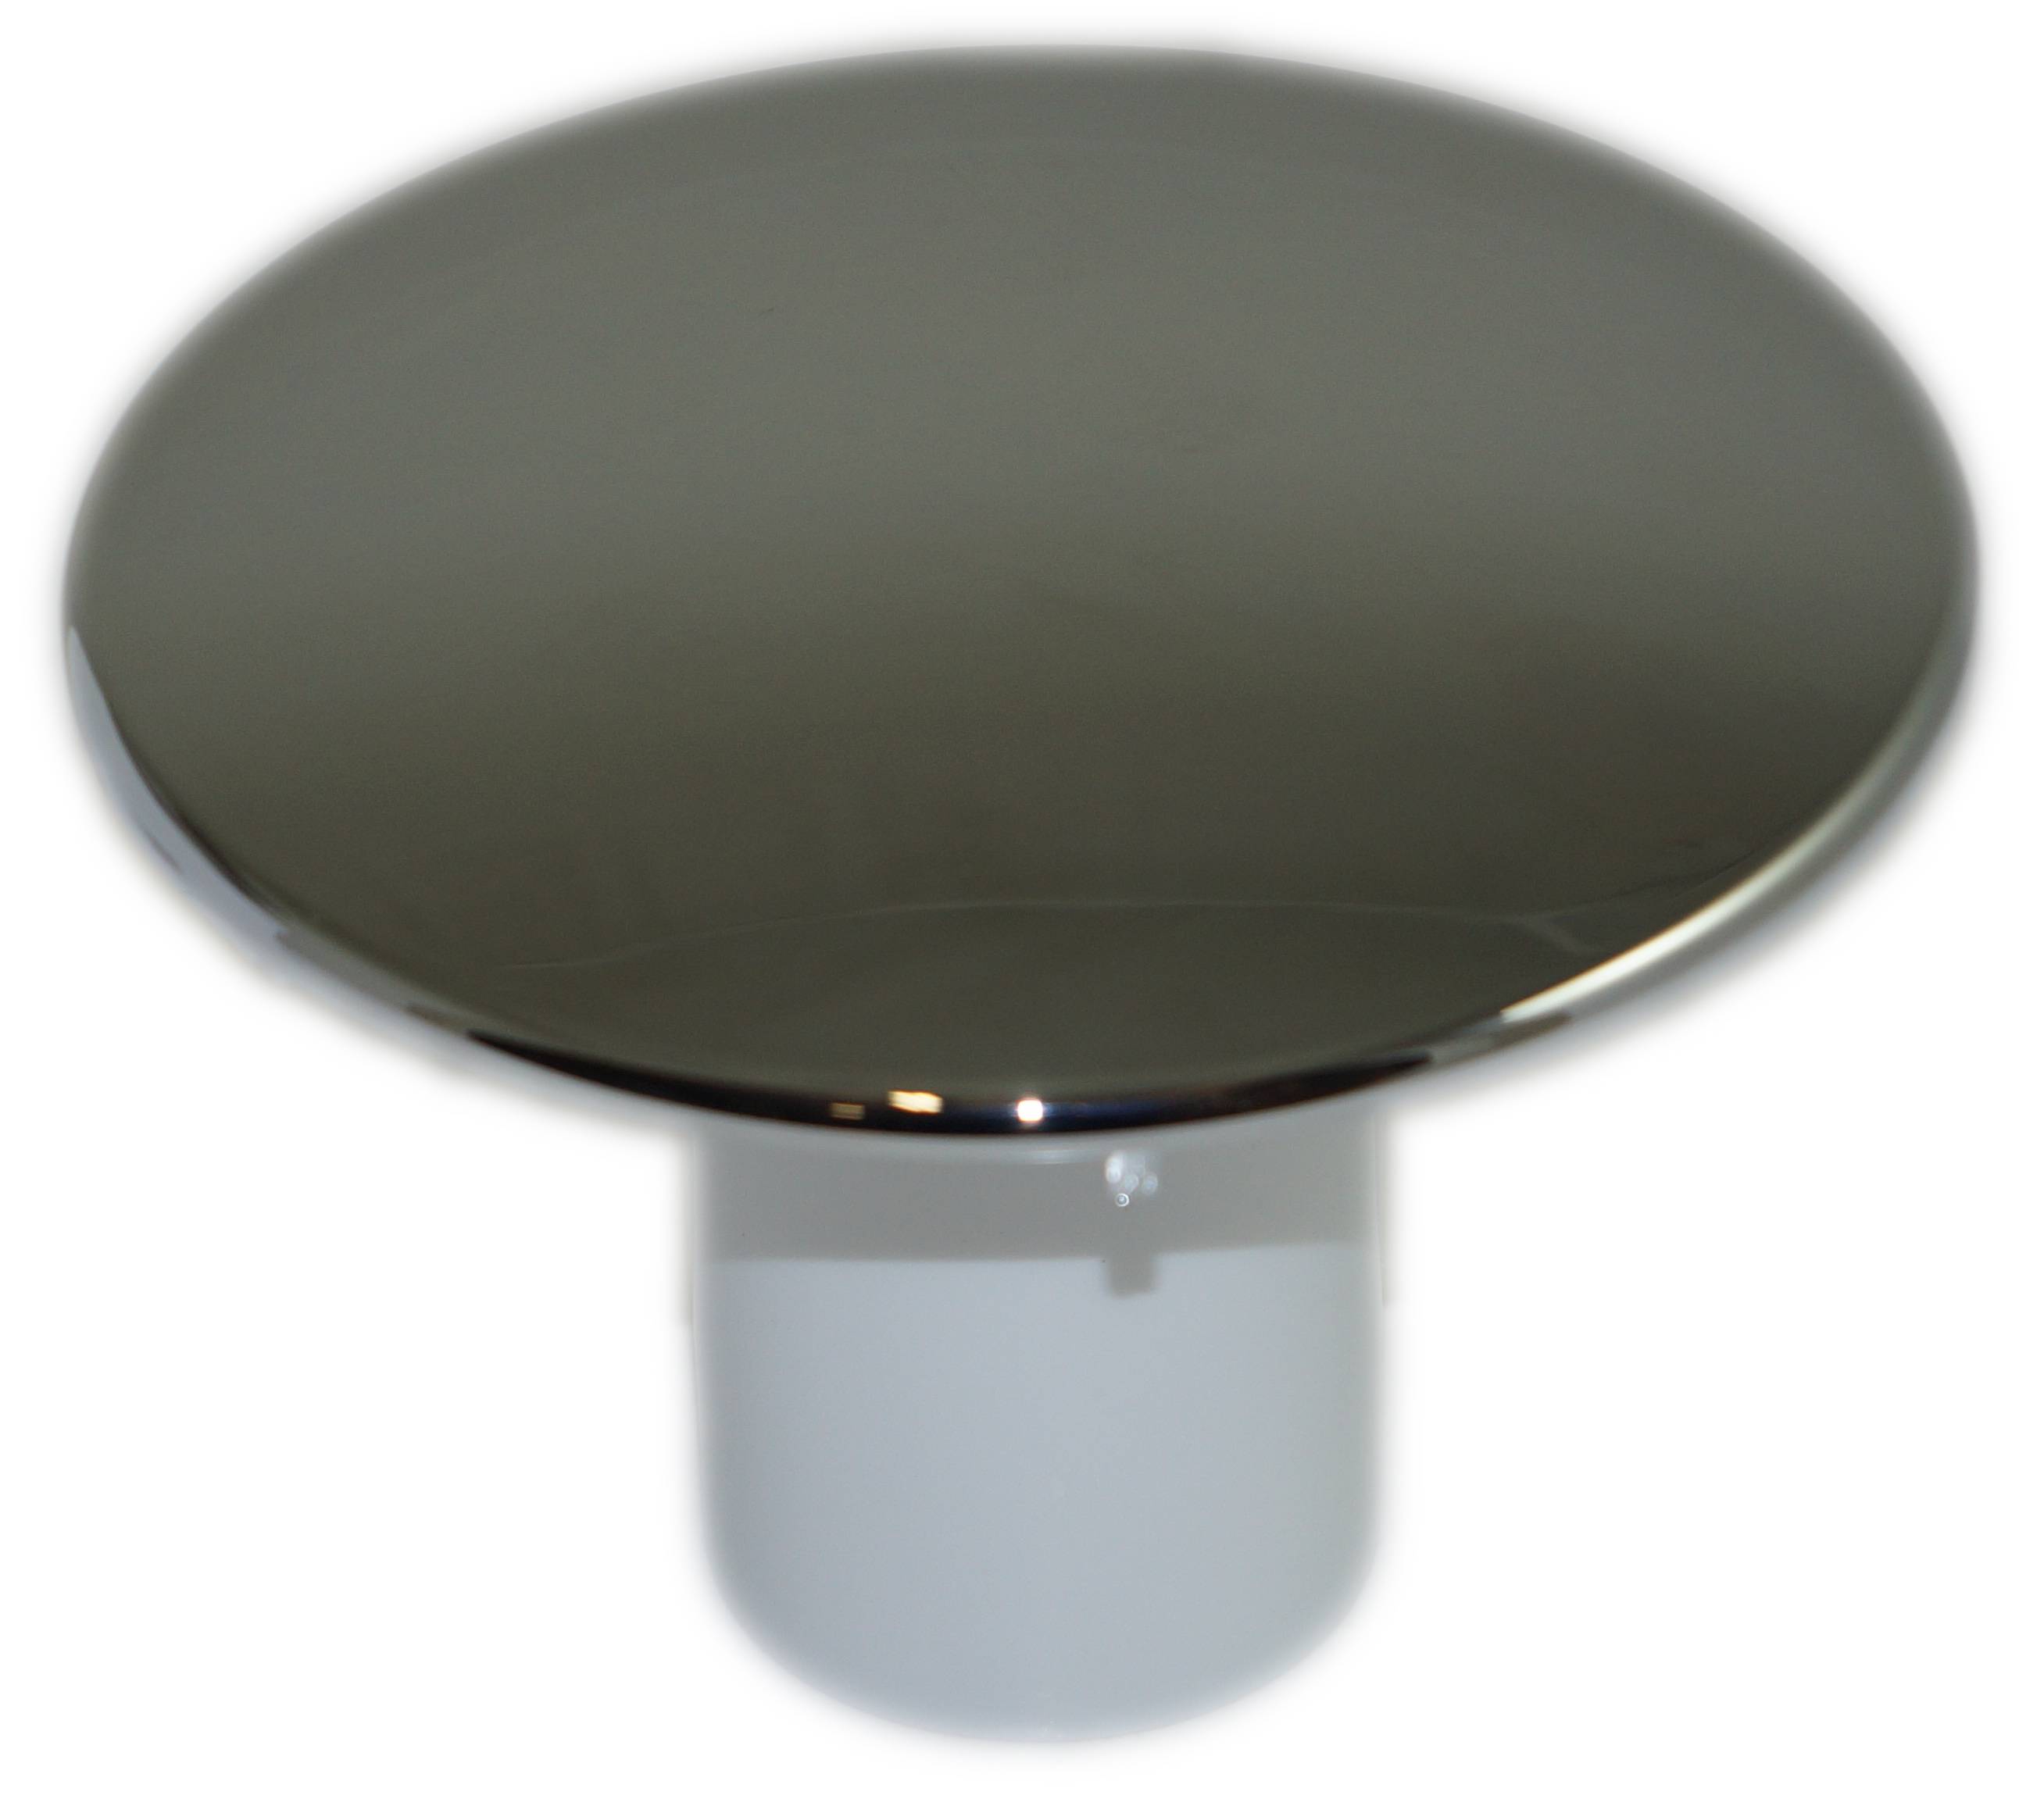 Chrome plated ABS cover with drip tube for 90mm diameter drain